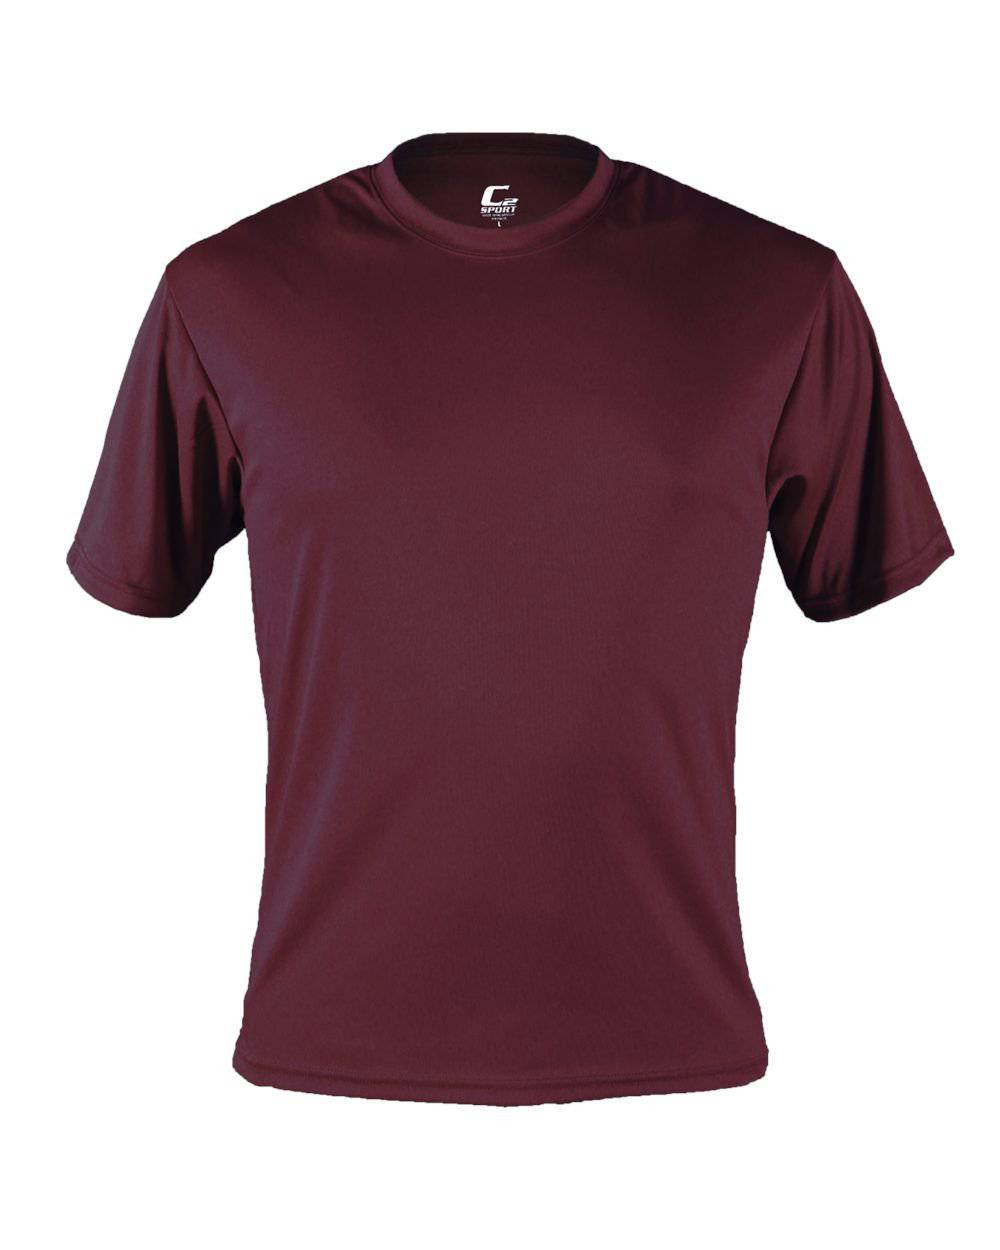 C2 Sport 5100 Performance Tee - Maroon - HIT a Double - 1